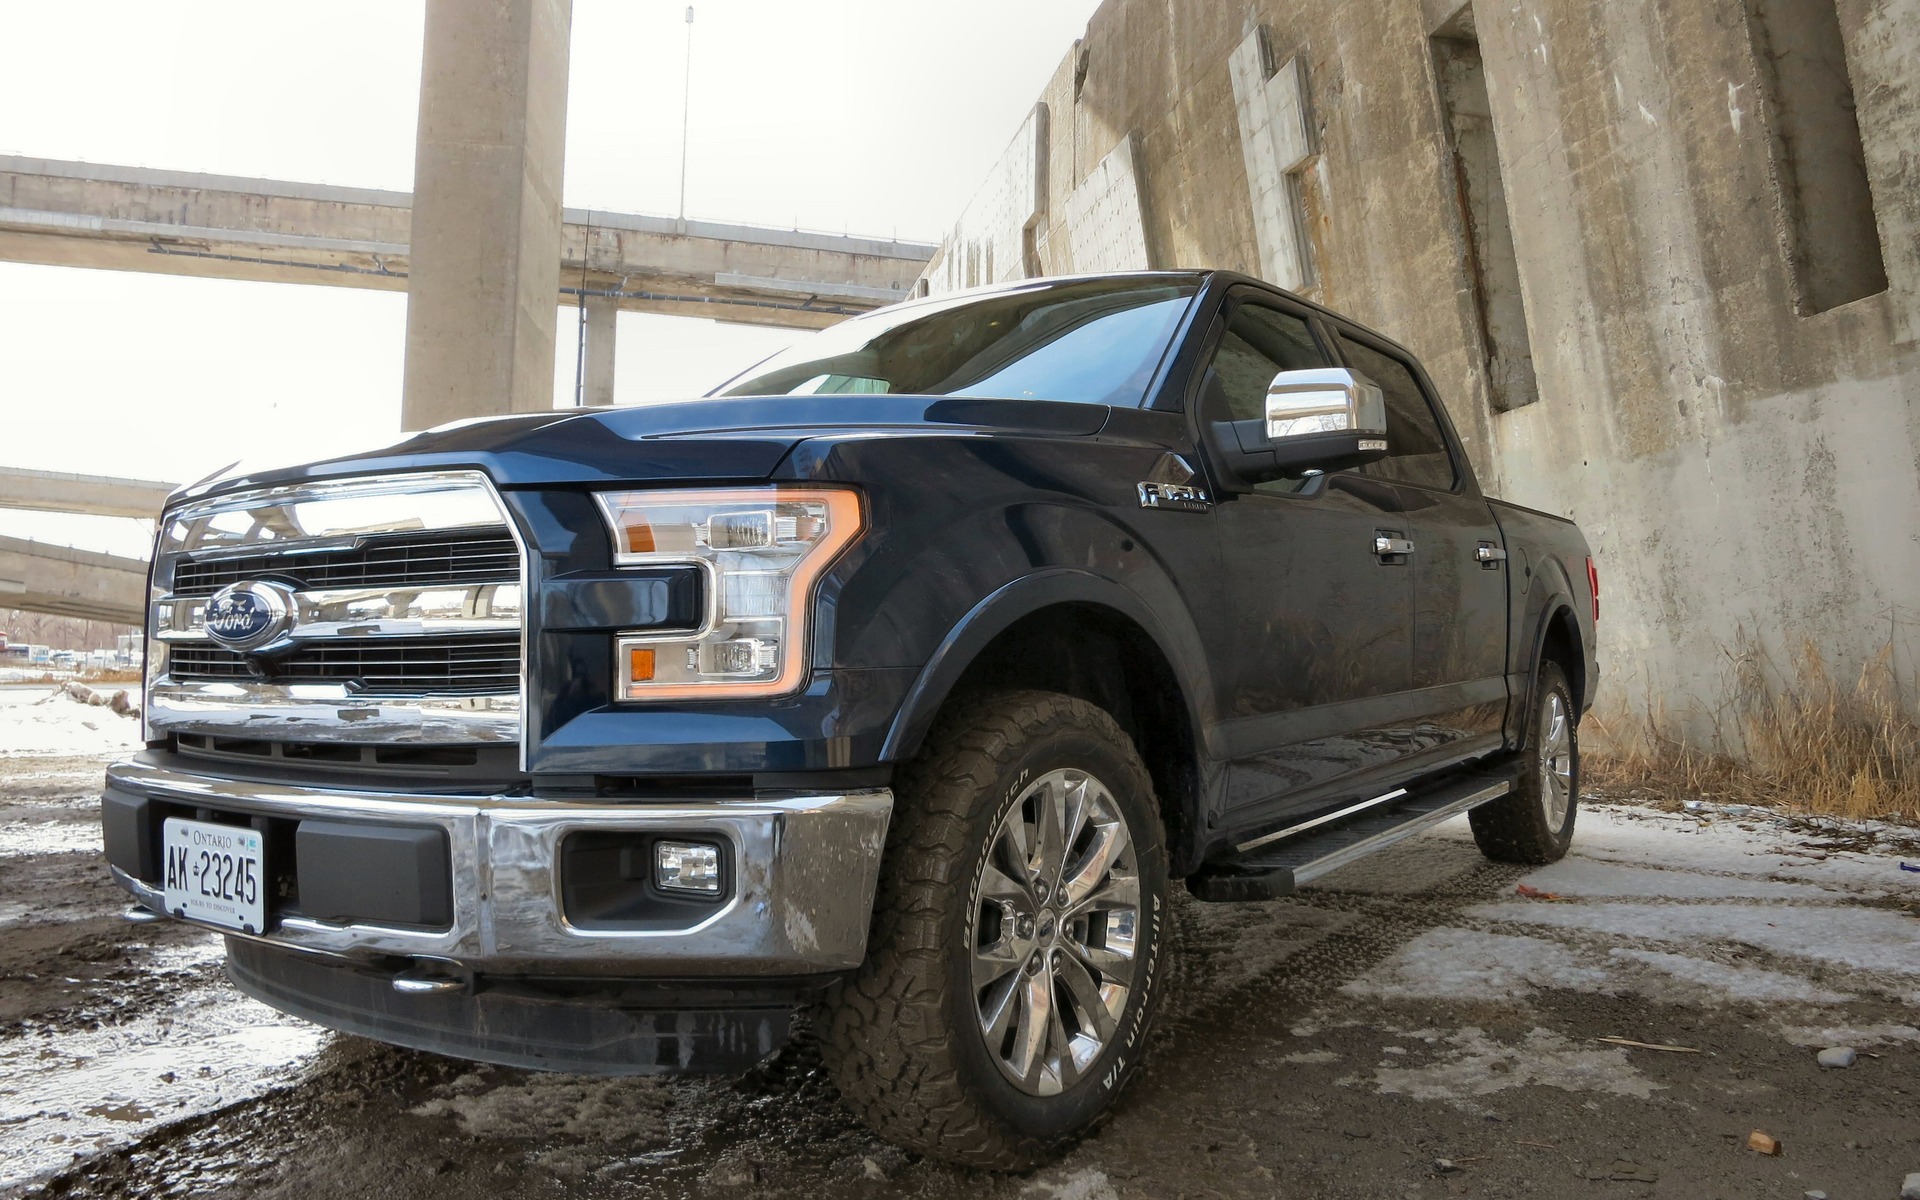 The truck has shed 300 kilograms compared to the 2014 edition.